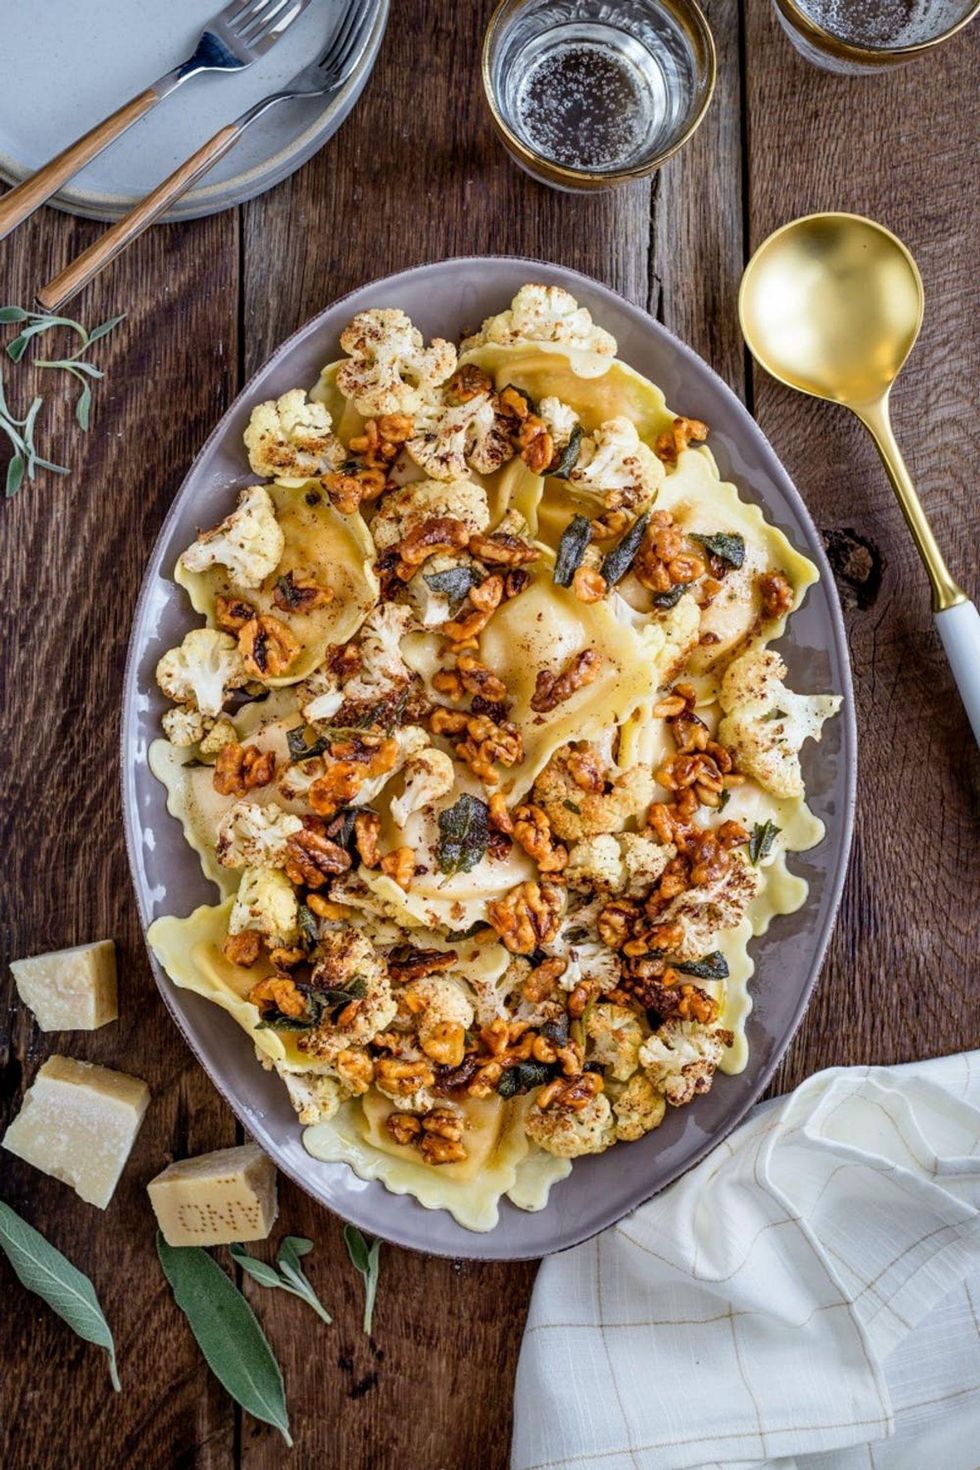 Butternut Squash Ravioli With Roasted Cauliflower and Brown Butter